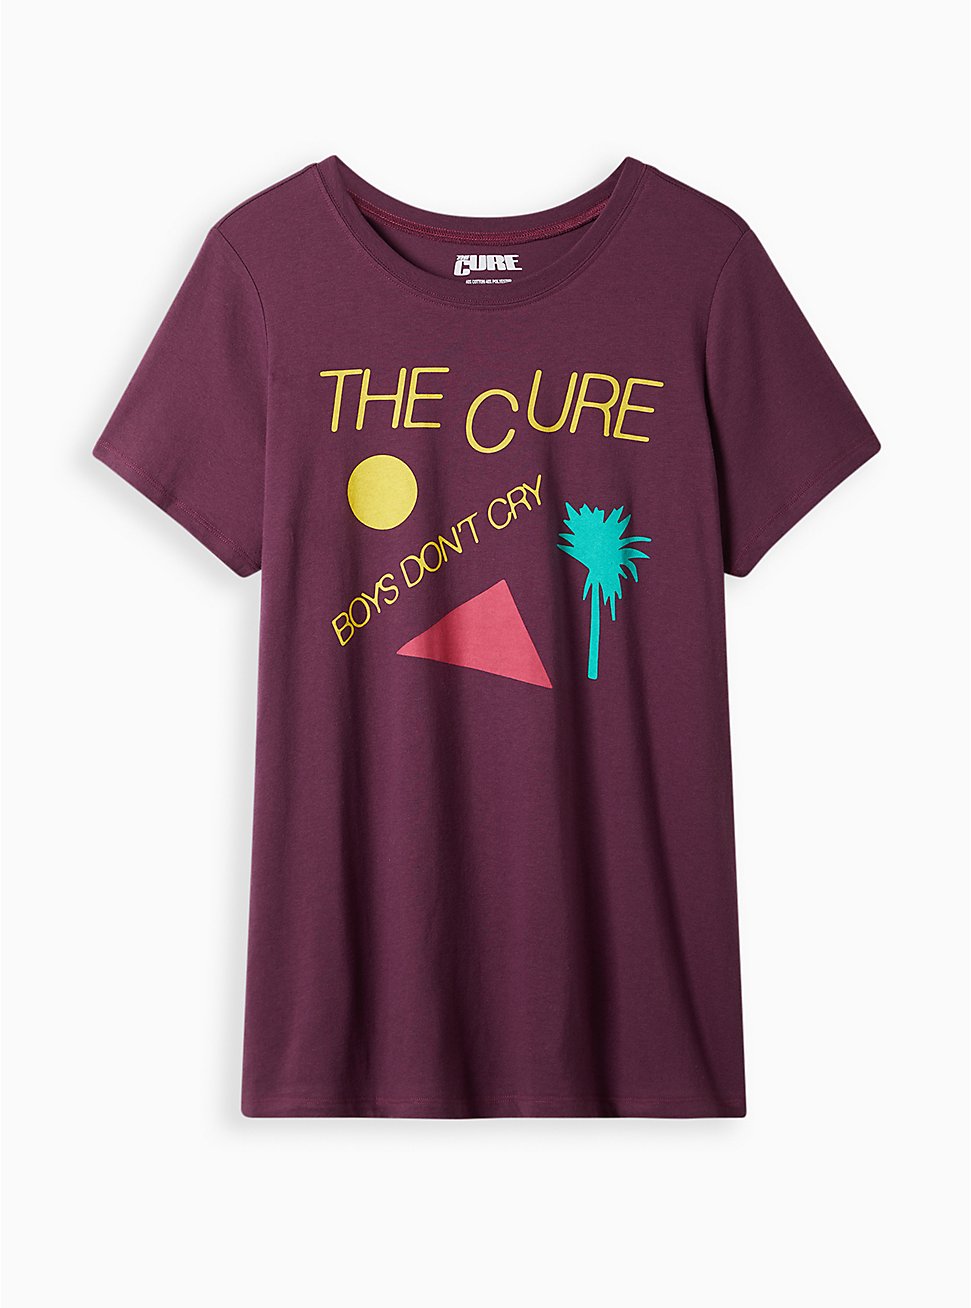 Classic Fit Crew Tee - The Cure Purple, PURPLE, hi-res